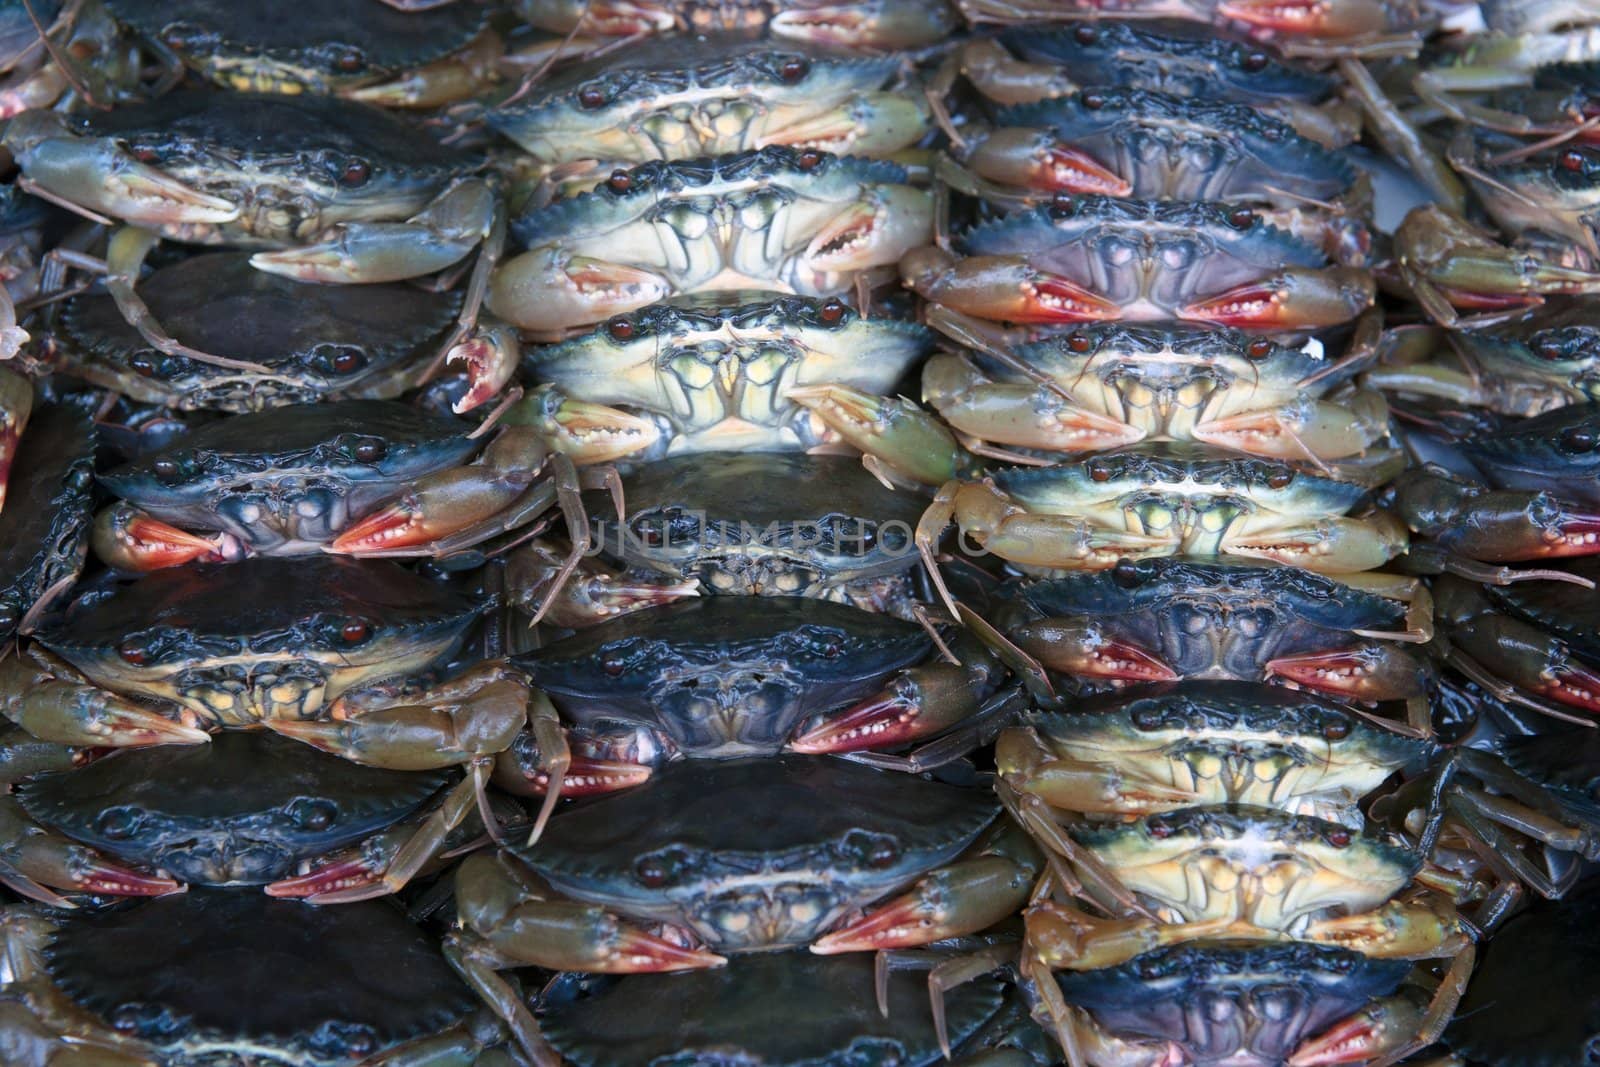 lots of crabs for sale by clearviewstock